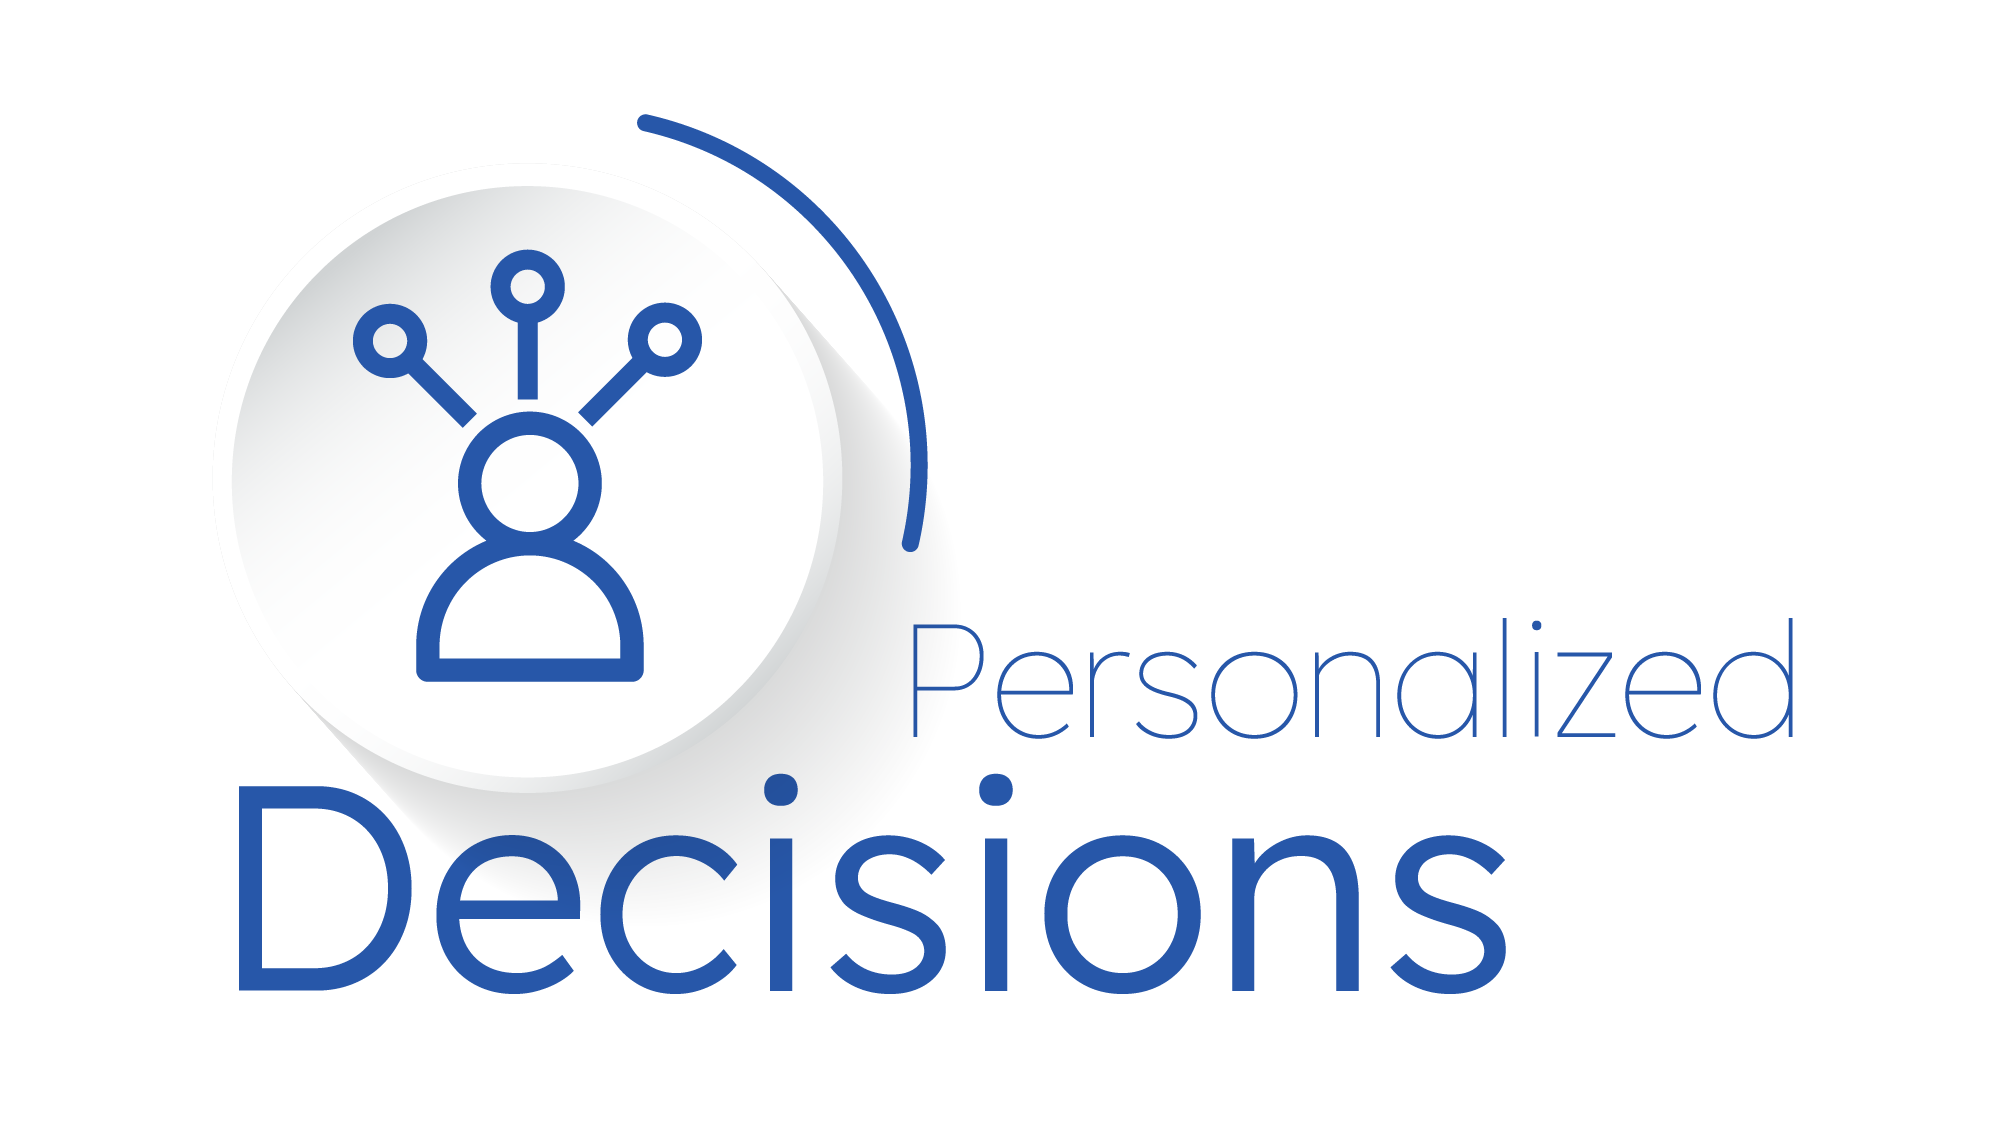 Personalized Decisions